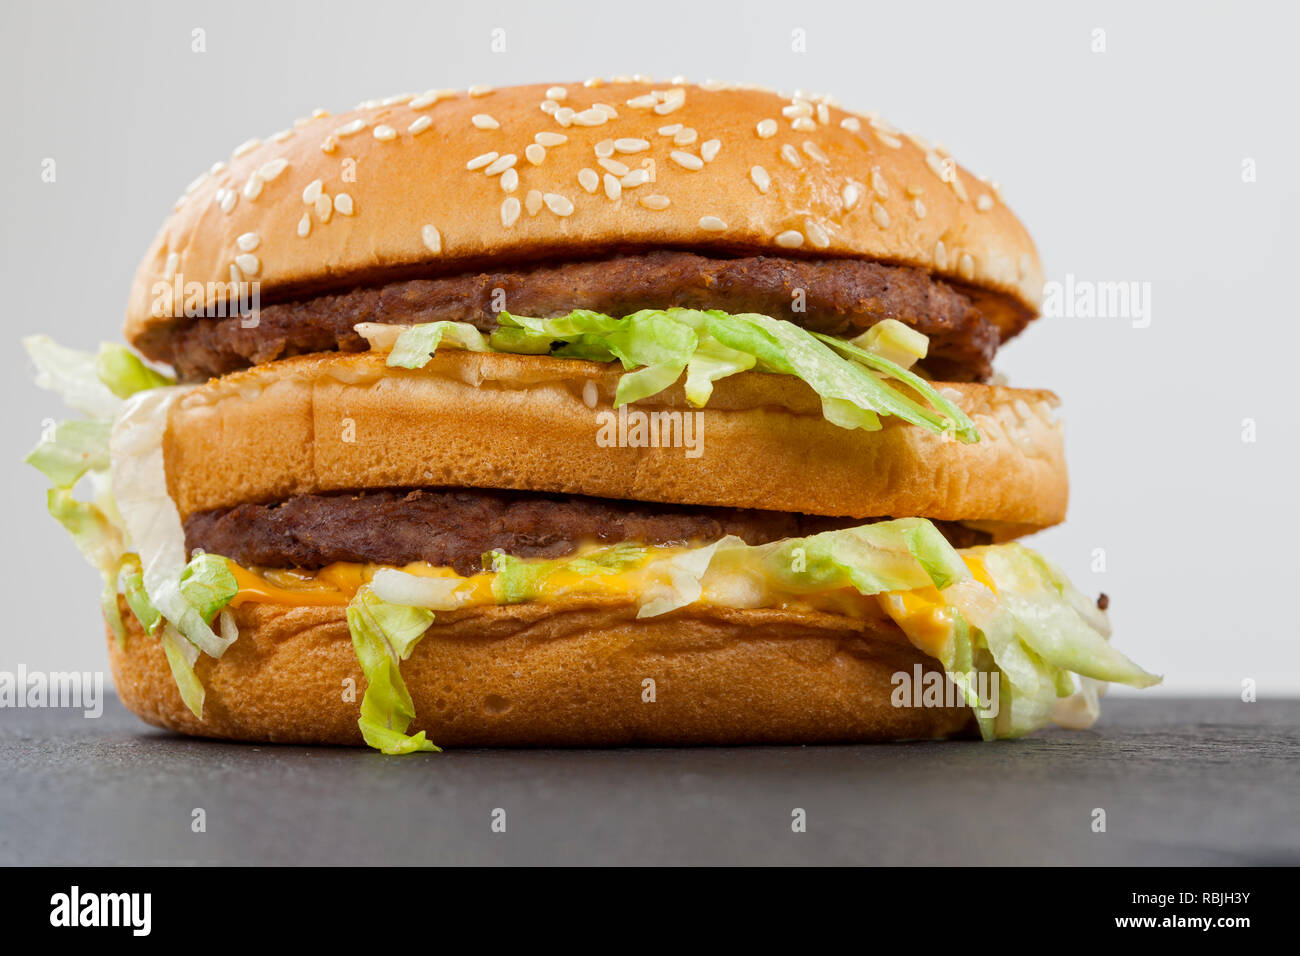 Close up picture of a tasty double cheeseburger with beef, cheddar, lettuce in a sesame bun Stock Photo